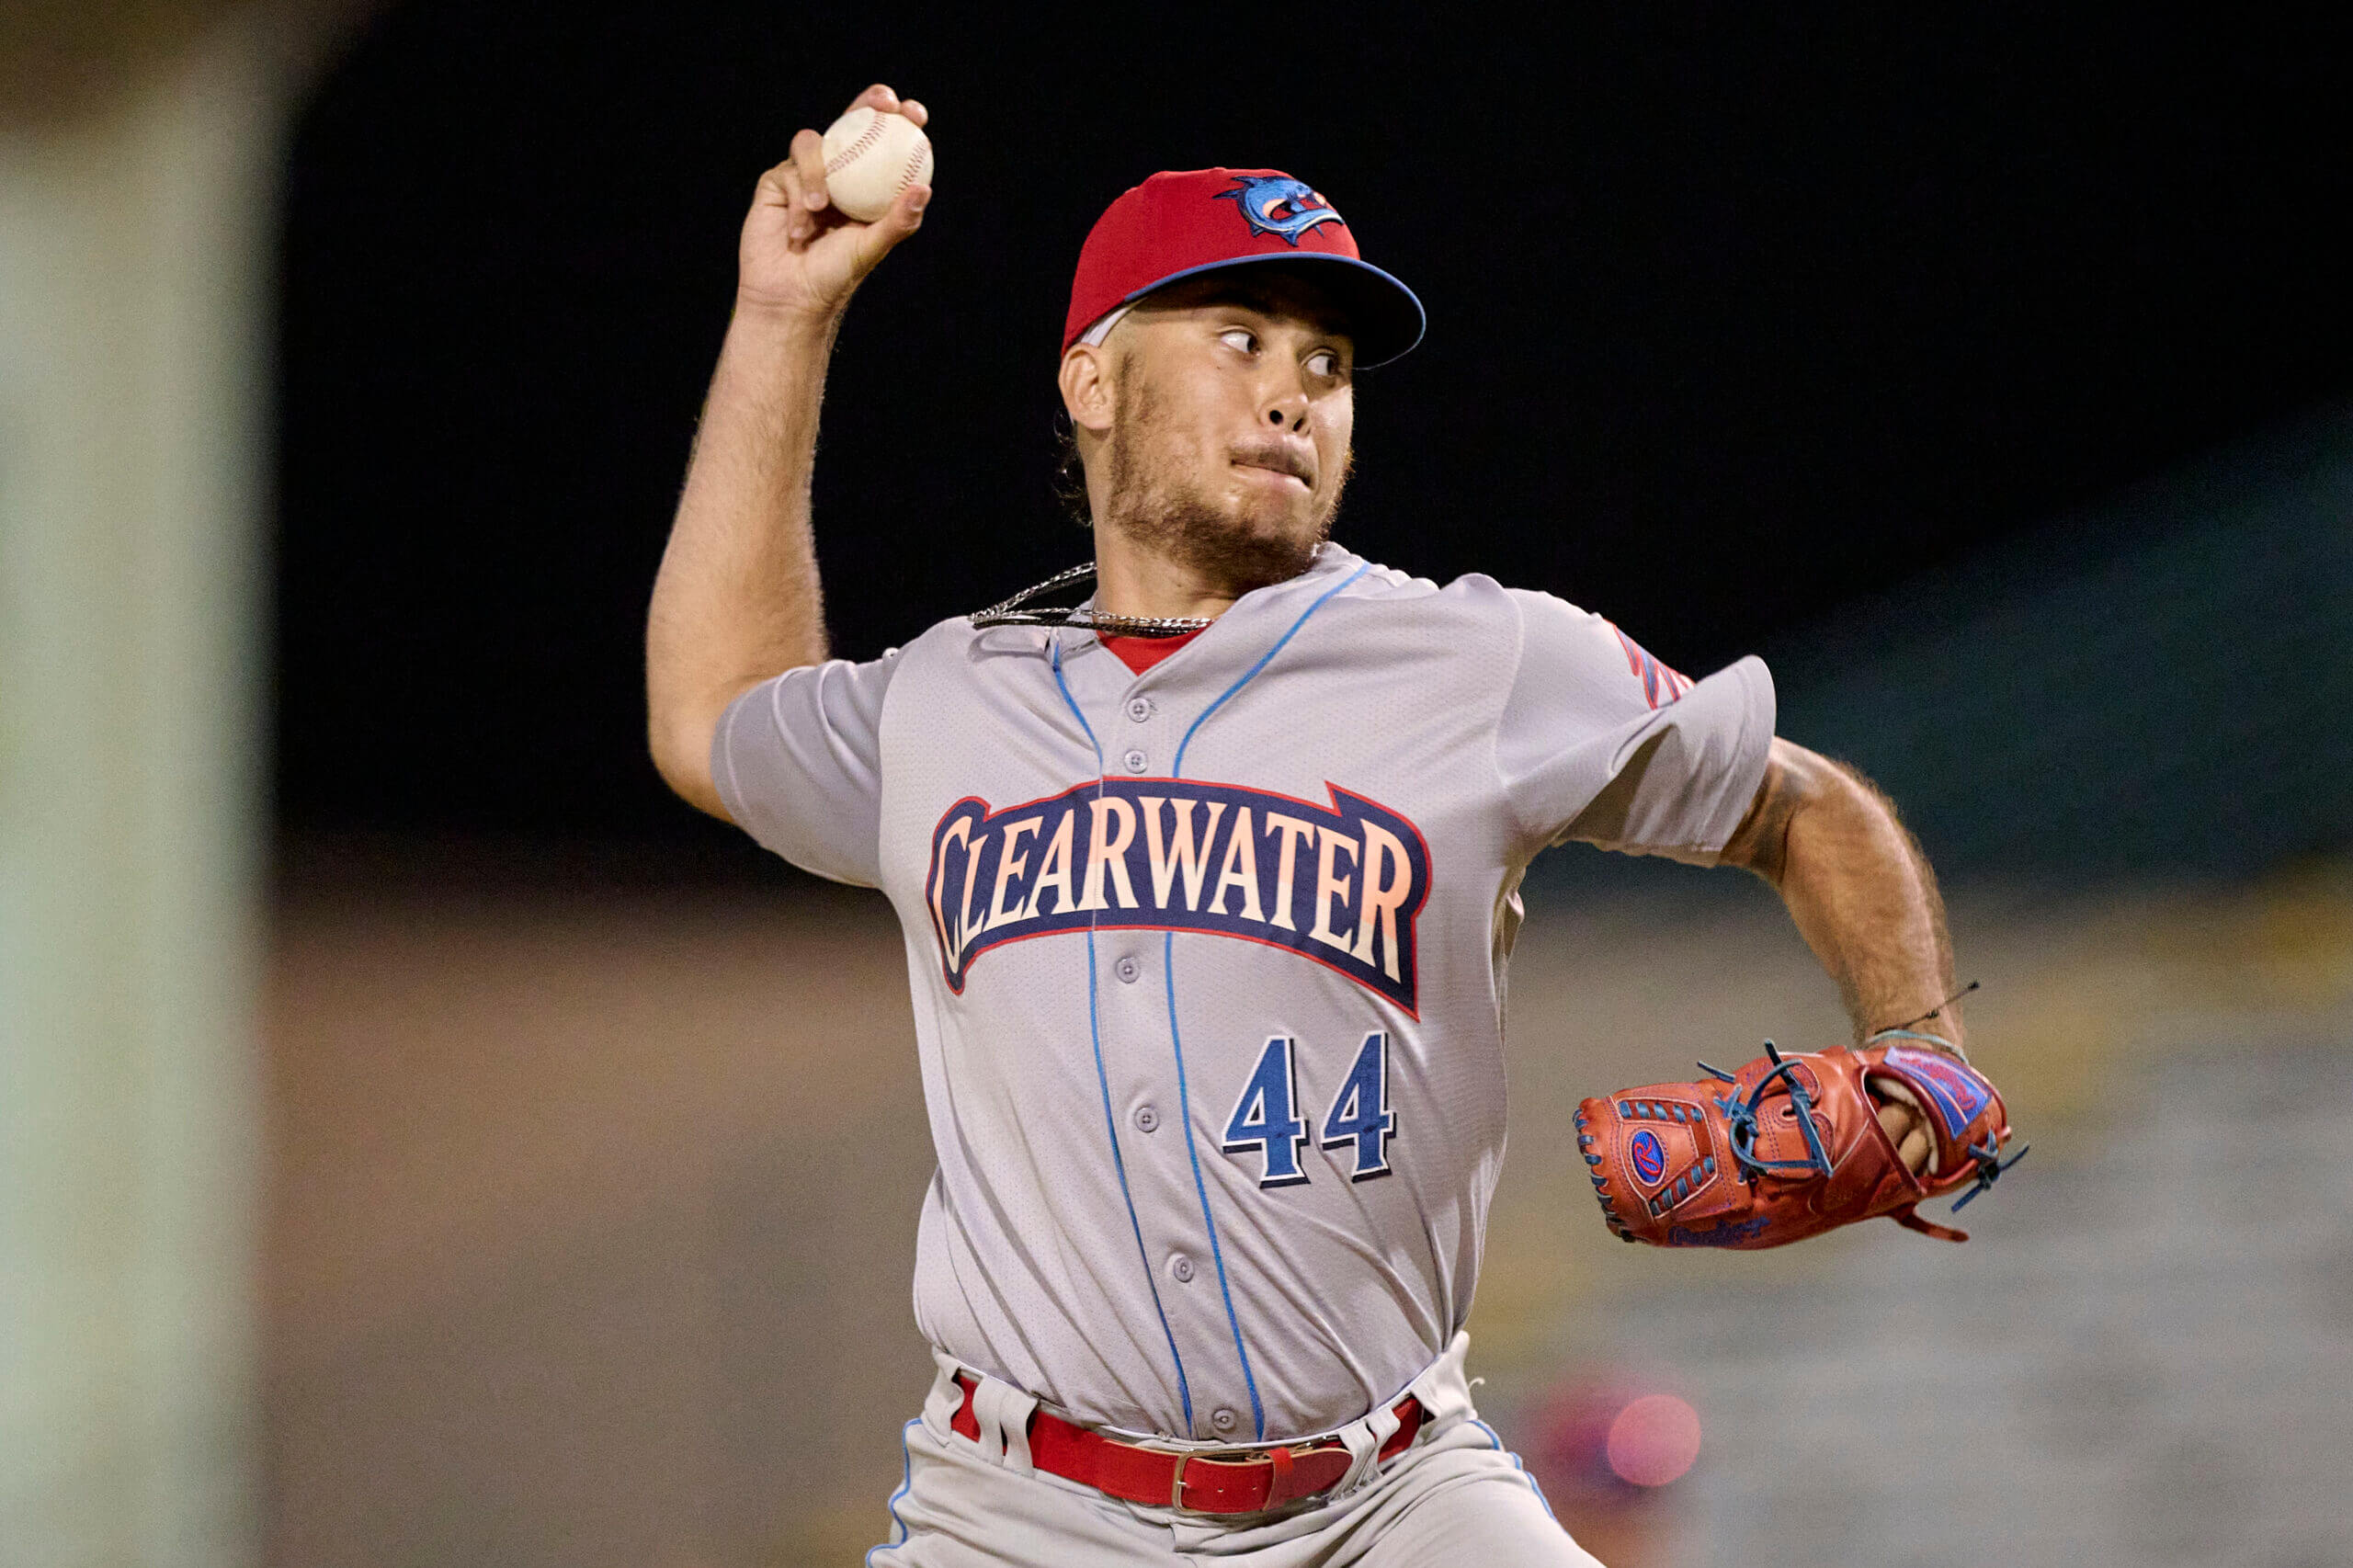 Phillies call up RHP Orion Kerkering, per sources Will he have an